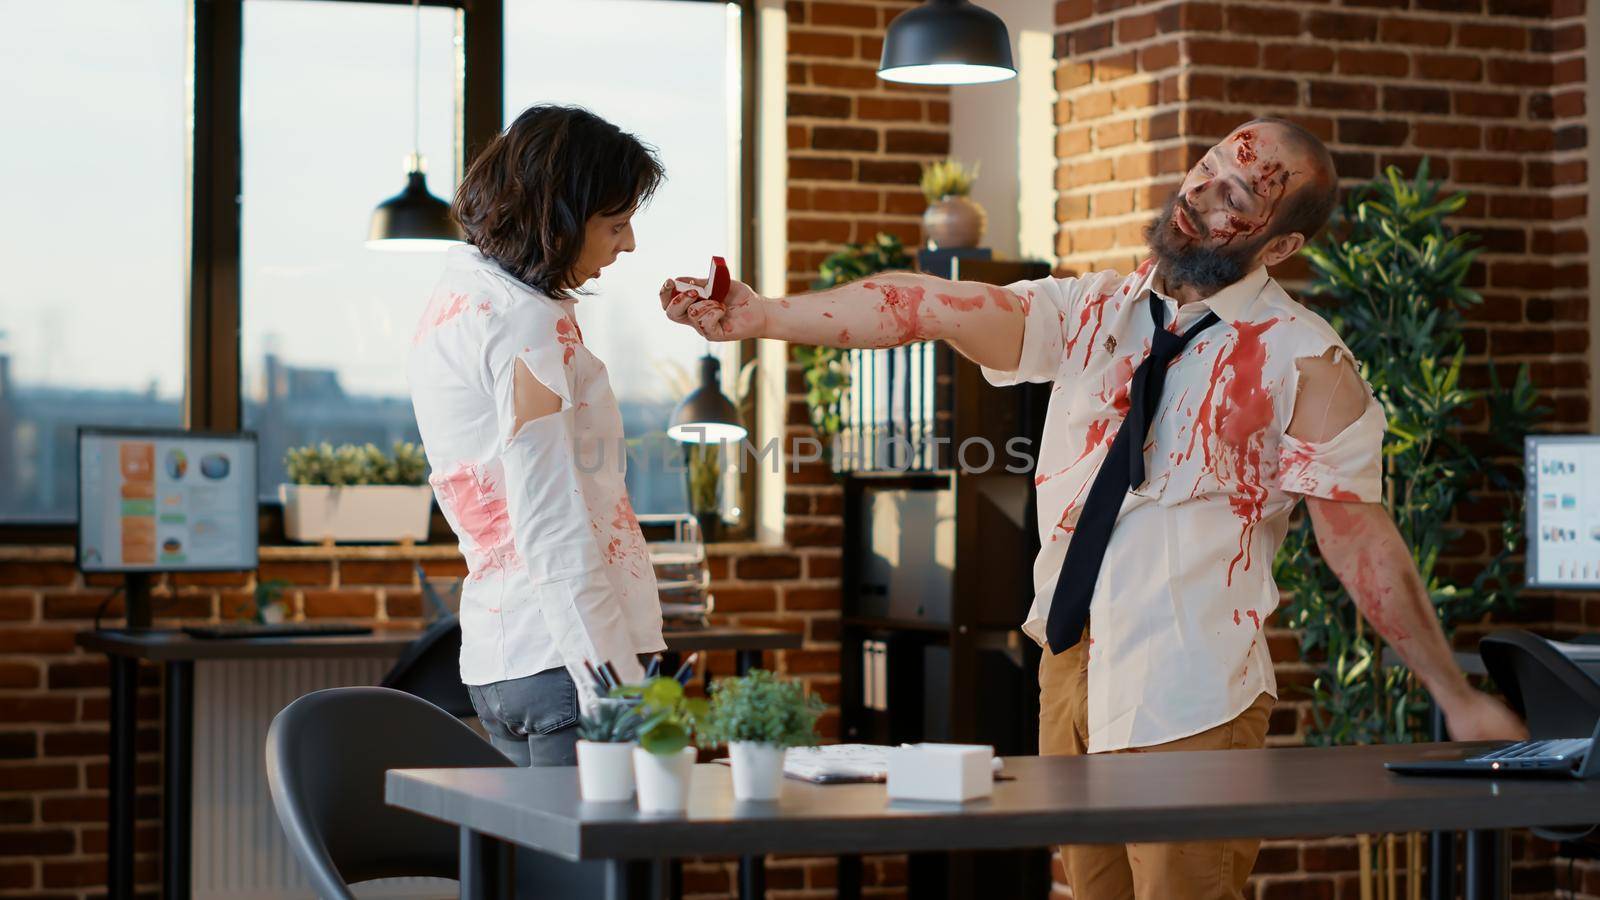 In love dead walking couple getting married inside company workspace. Bizarre looking undead evil monster with deep and bloody wounds and scars in office proposing his girlfriend.